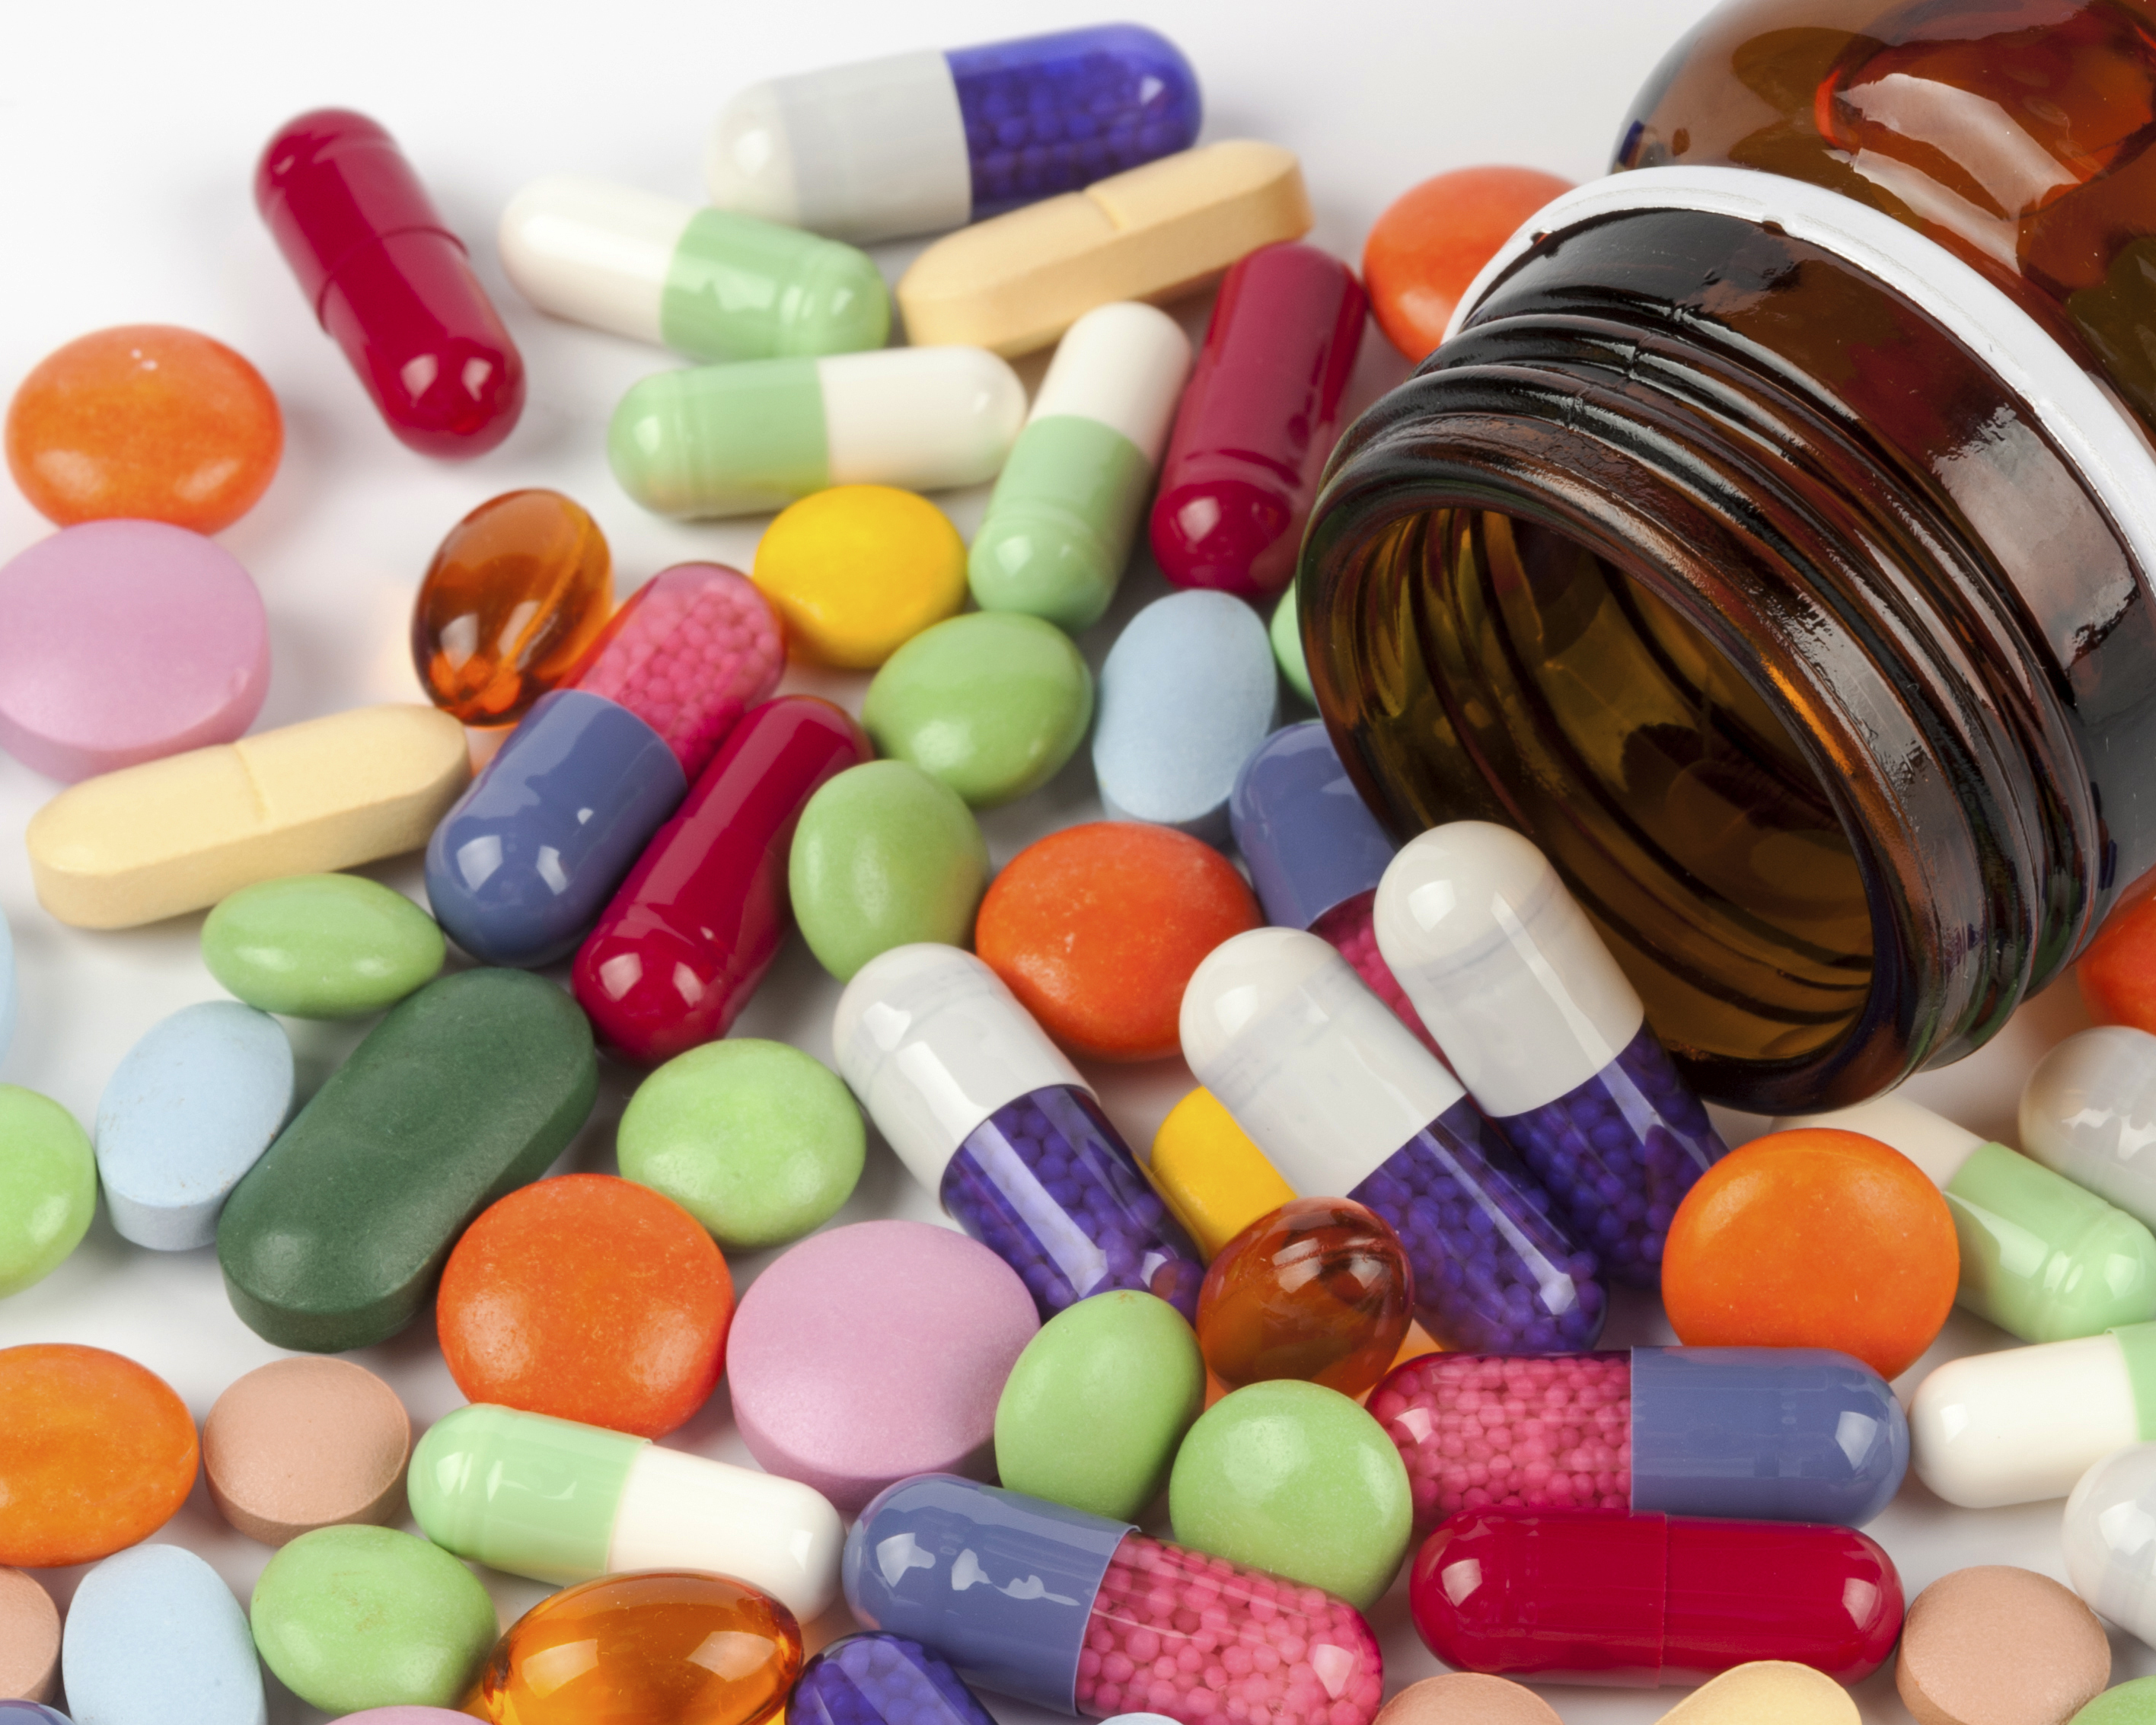 brown medicine bottle spilling out vitamins and pharmaceutical drugs